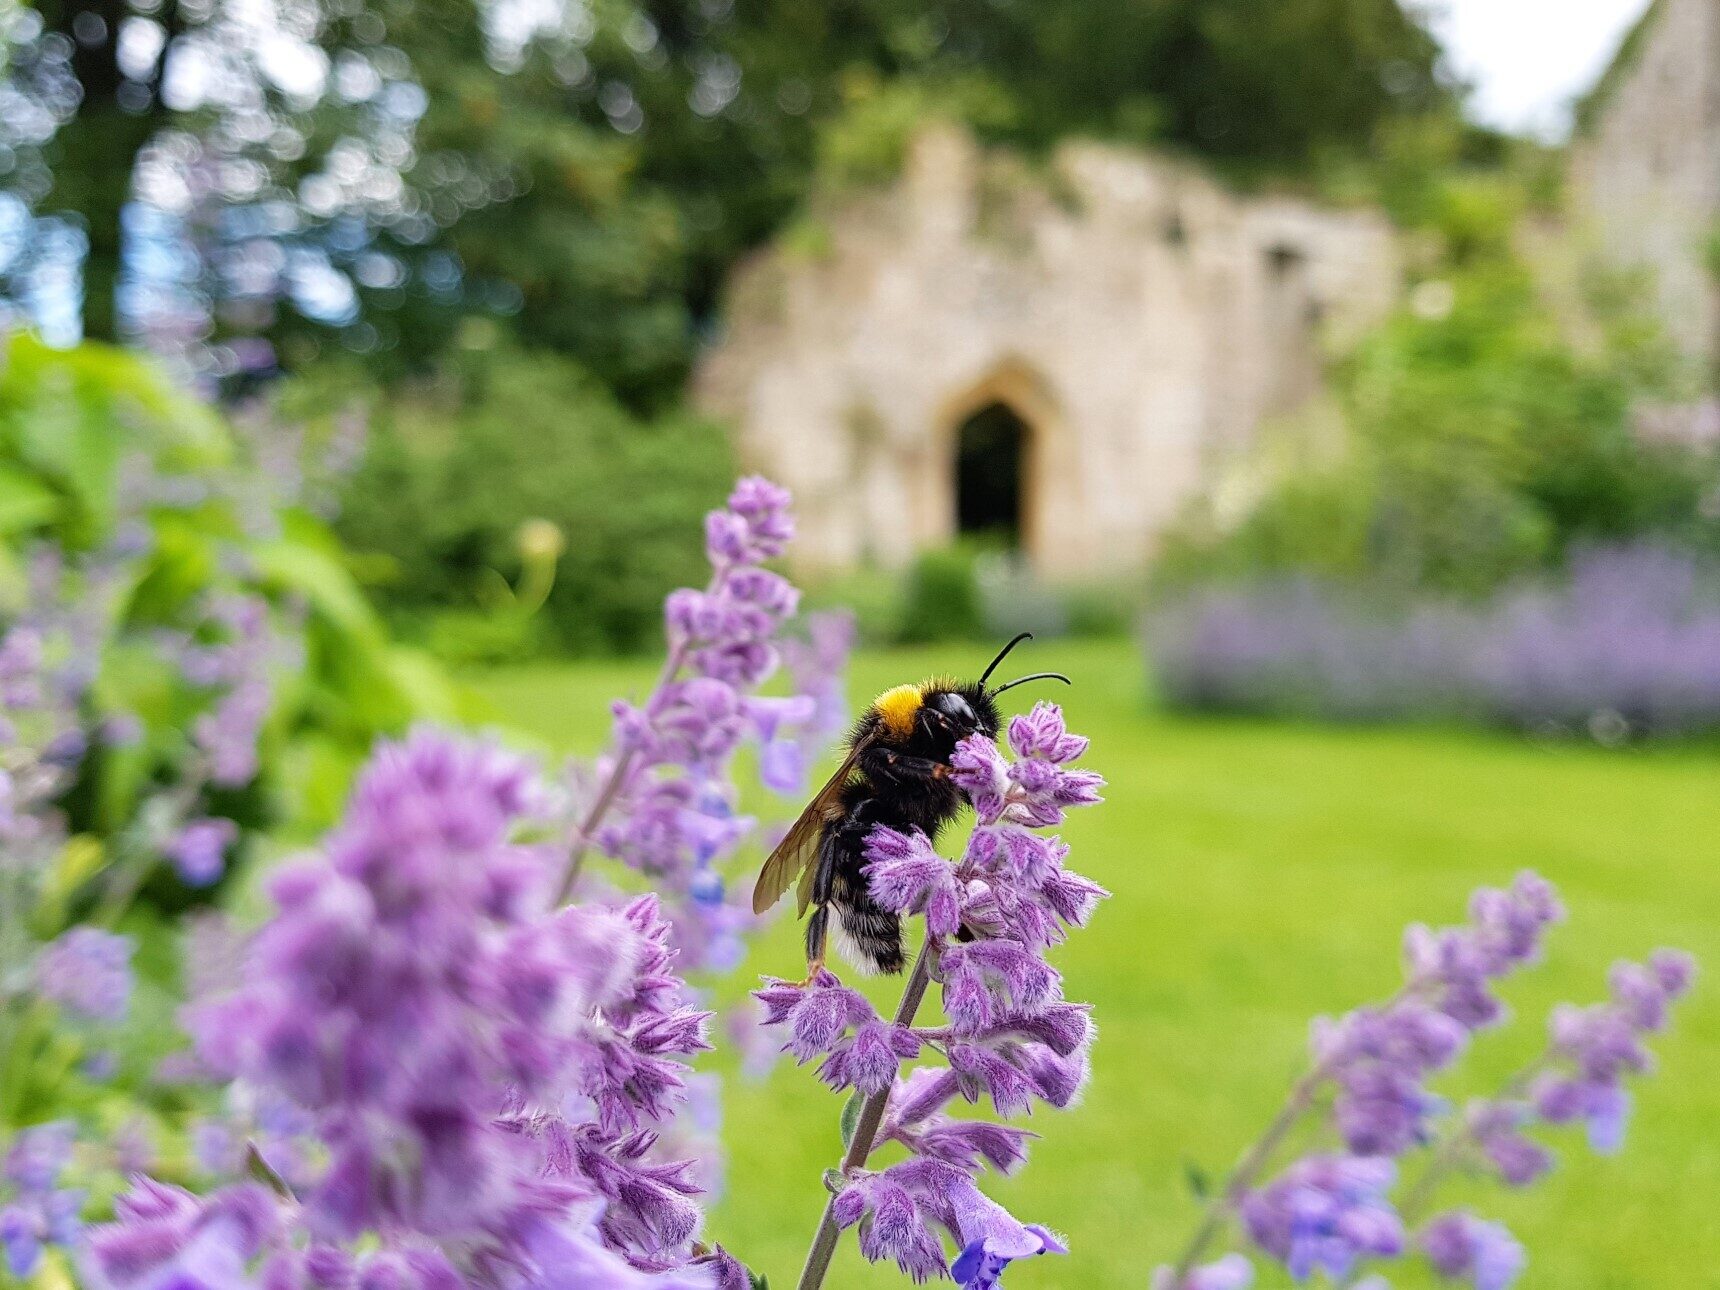 Sudeley's gardens are a haven for bees and insects, now they have their very own 'Bugeley Castle'